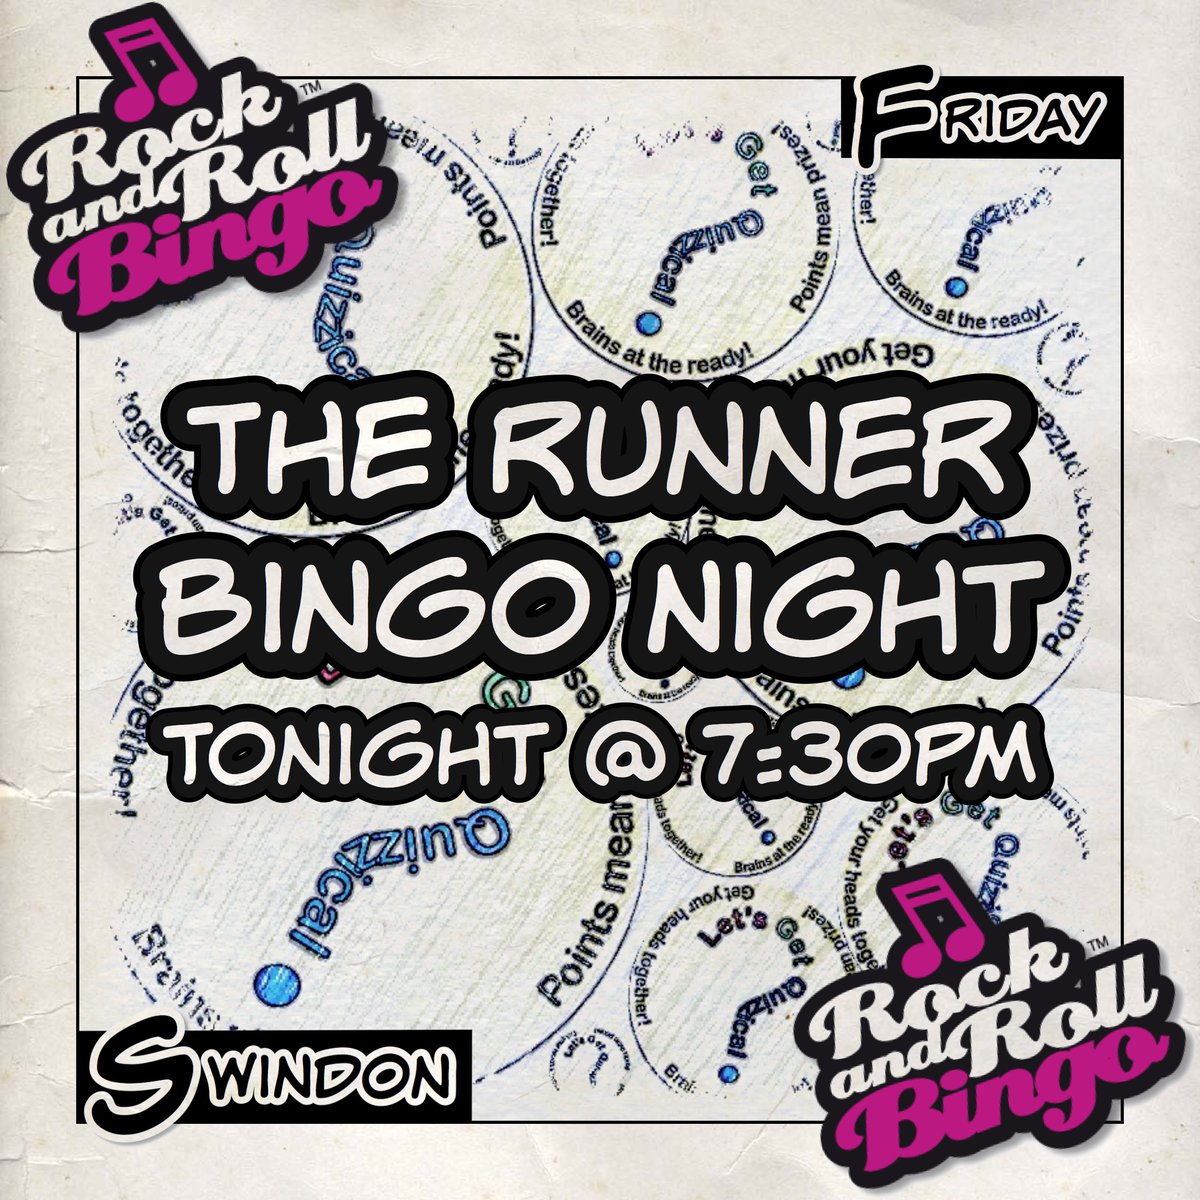 It’s #RockAndRollBingo at #TheRunner in #Swindon tonight! 7:30pm start for a night of #Music #Bingo with cash to be won